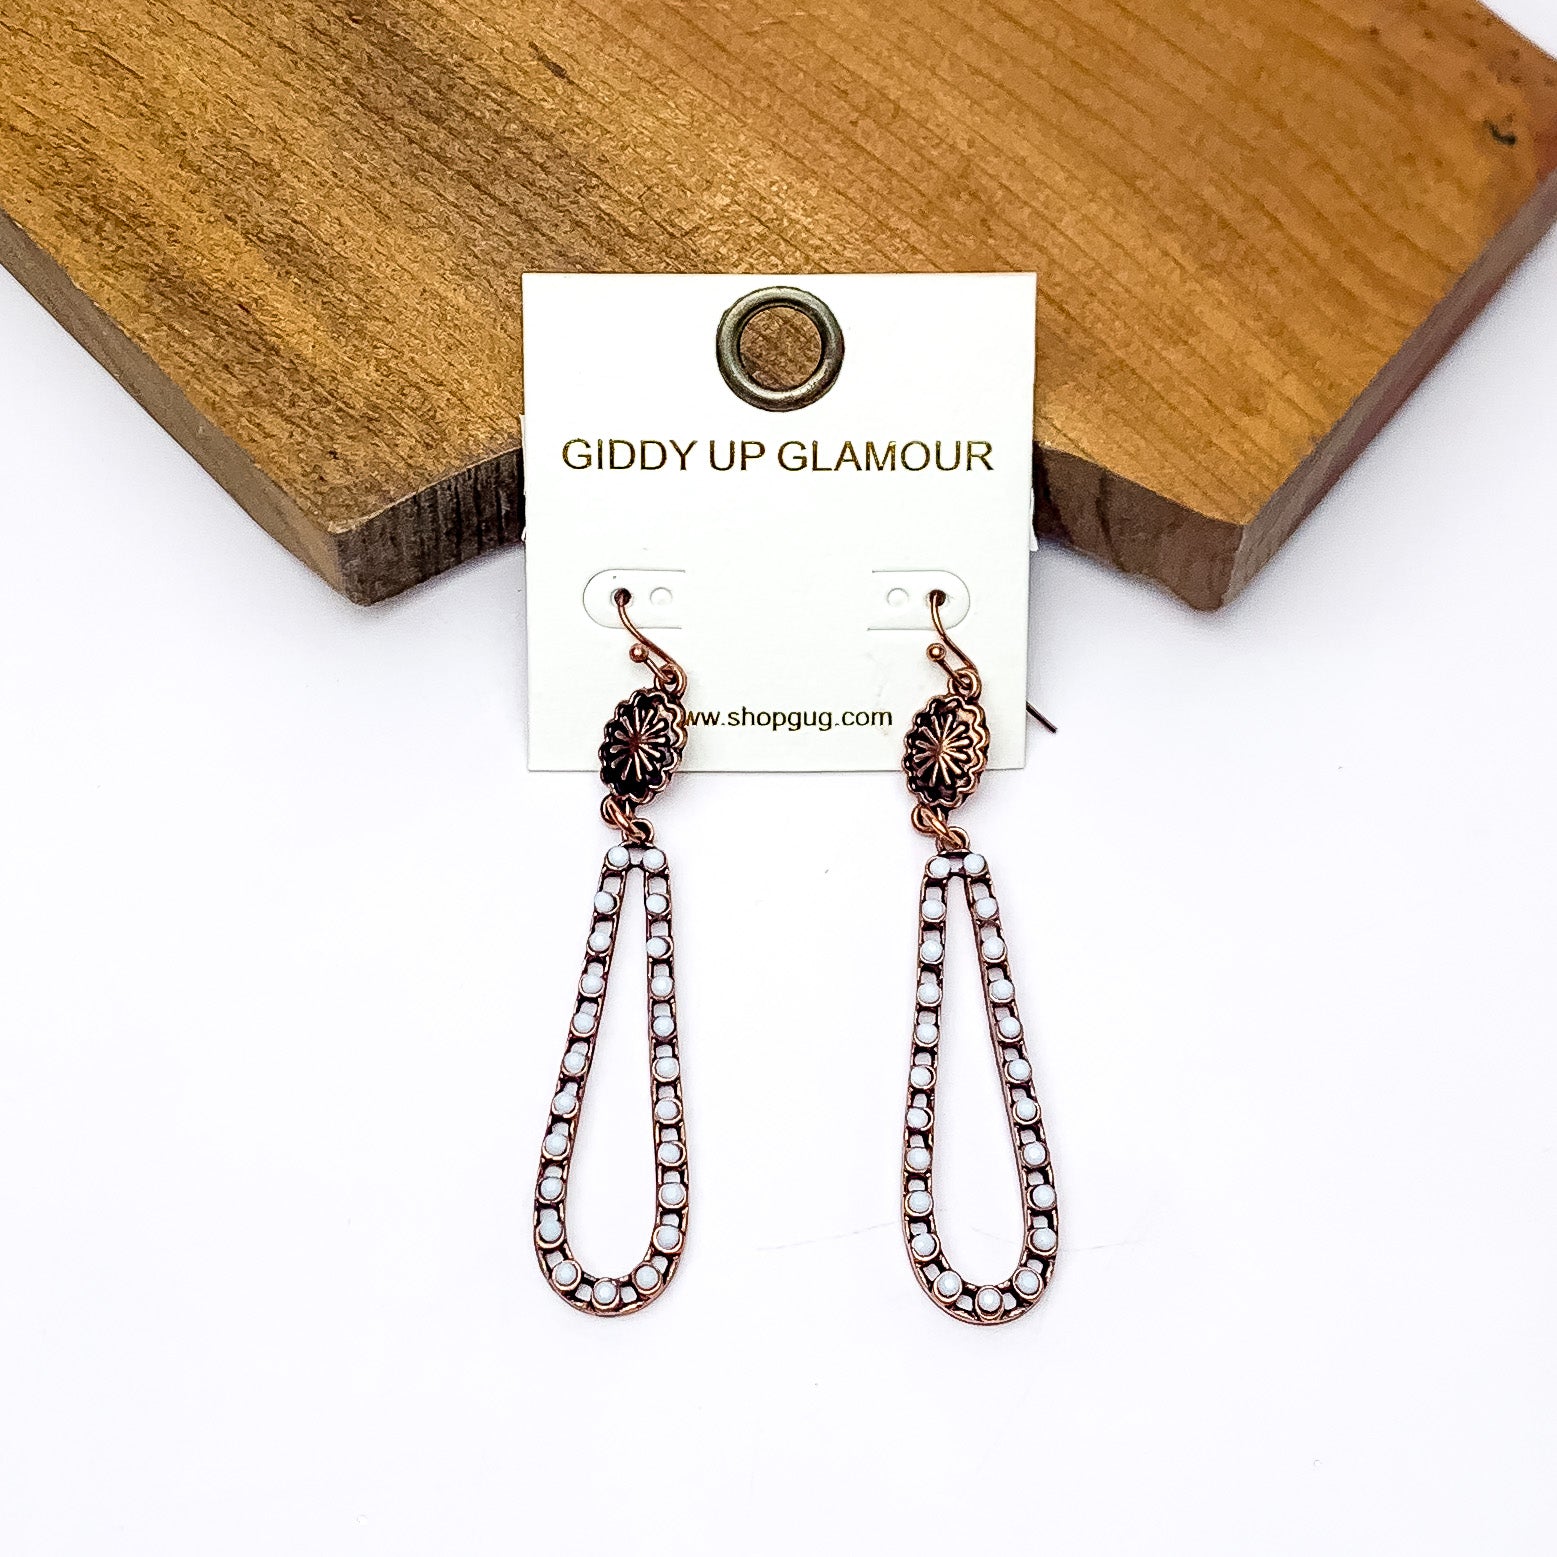 Copper Tone Open Teardrop Earrings With Small Stones in Ivory. Pictured on a white background with the earrings laying against a wood piece.